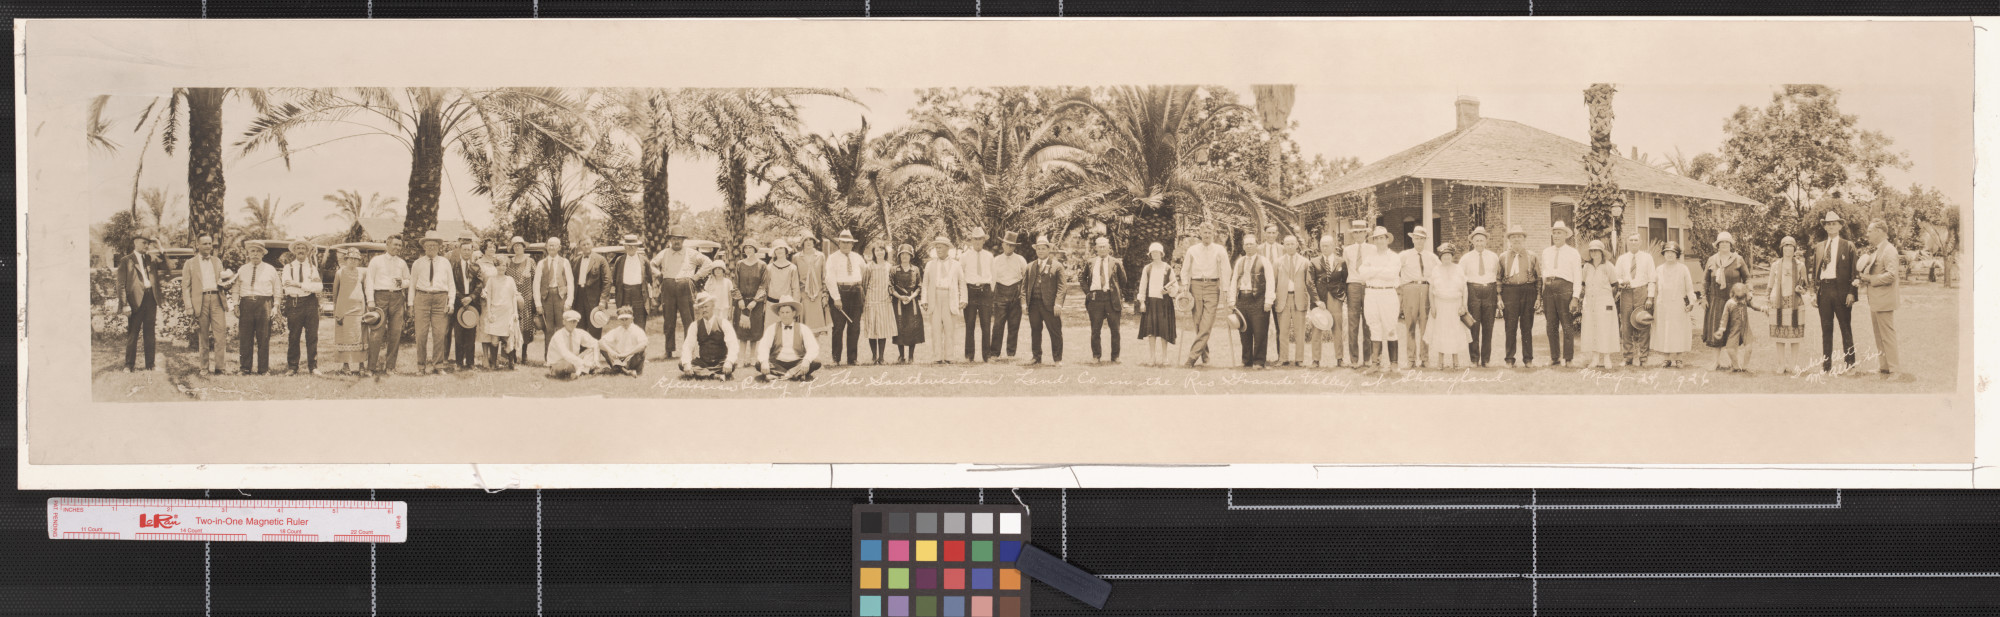 Excursion party of the Southwestern Land Co. in the Rio Grande Valley at Sharyland
                                                
                                                    [Sequence #]: 1 of 1
                                                